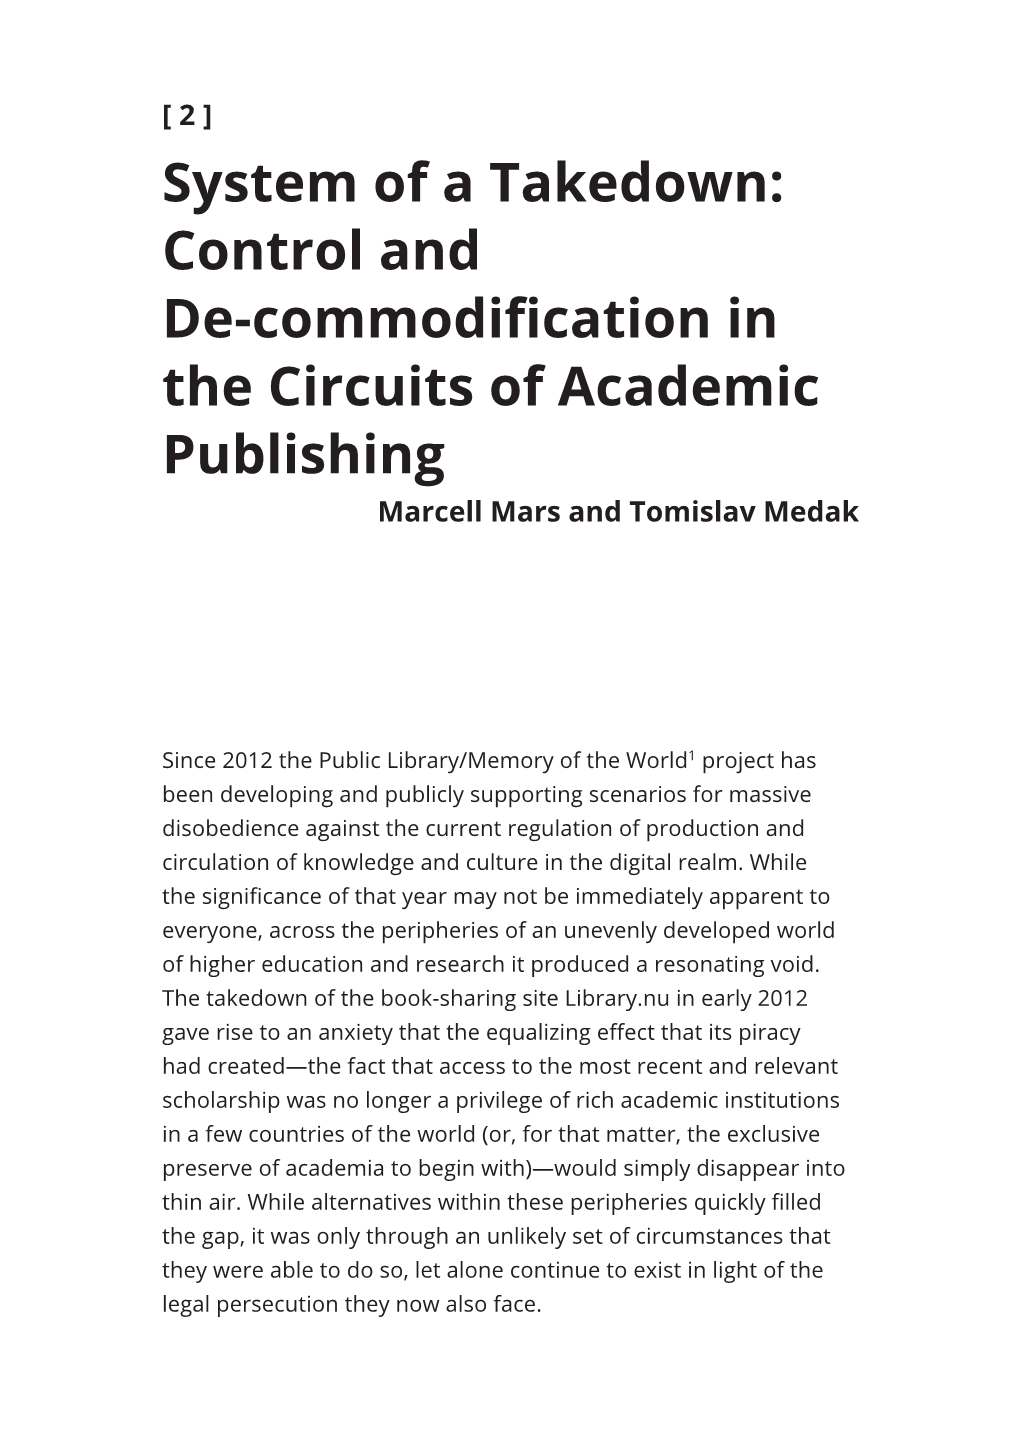 Control and De- Commodification in the Circuits of Academic Publishing